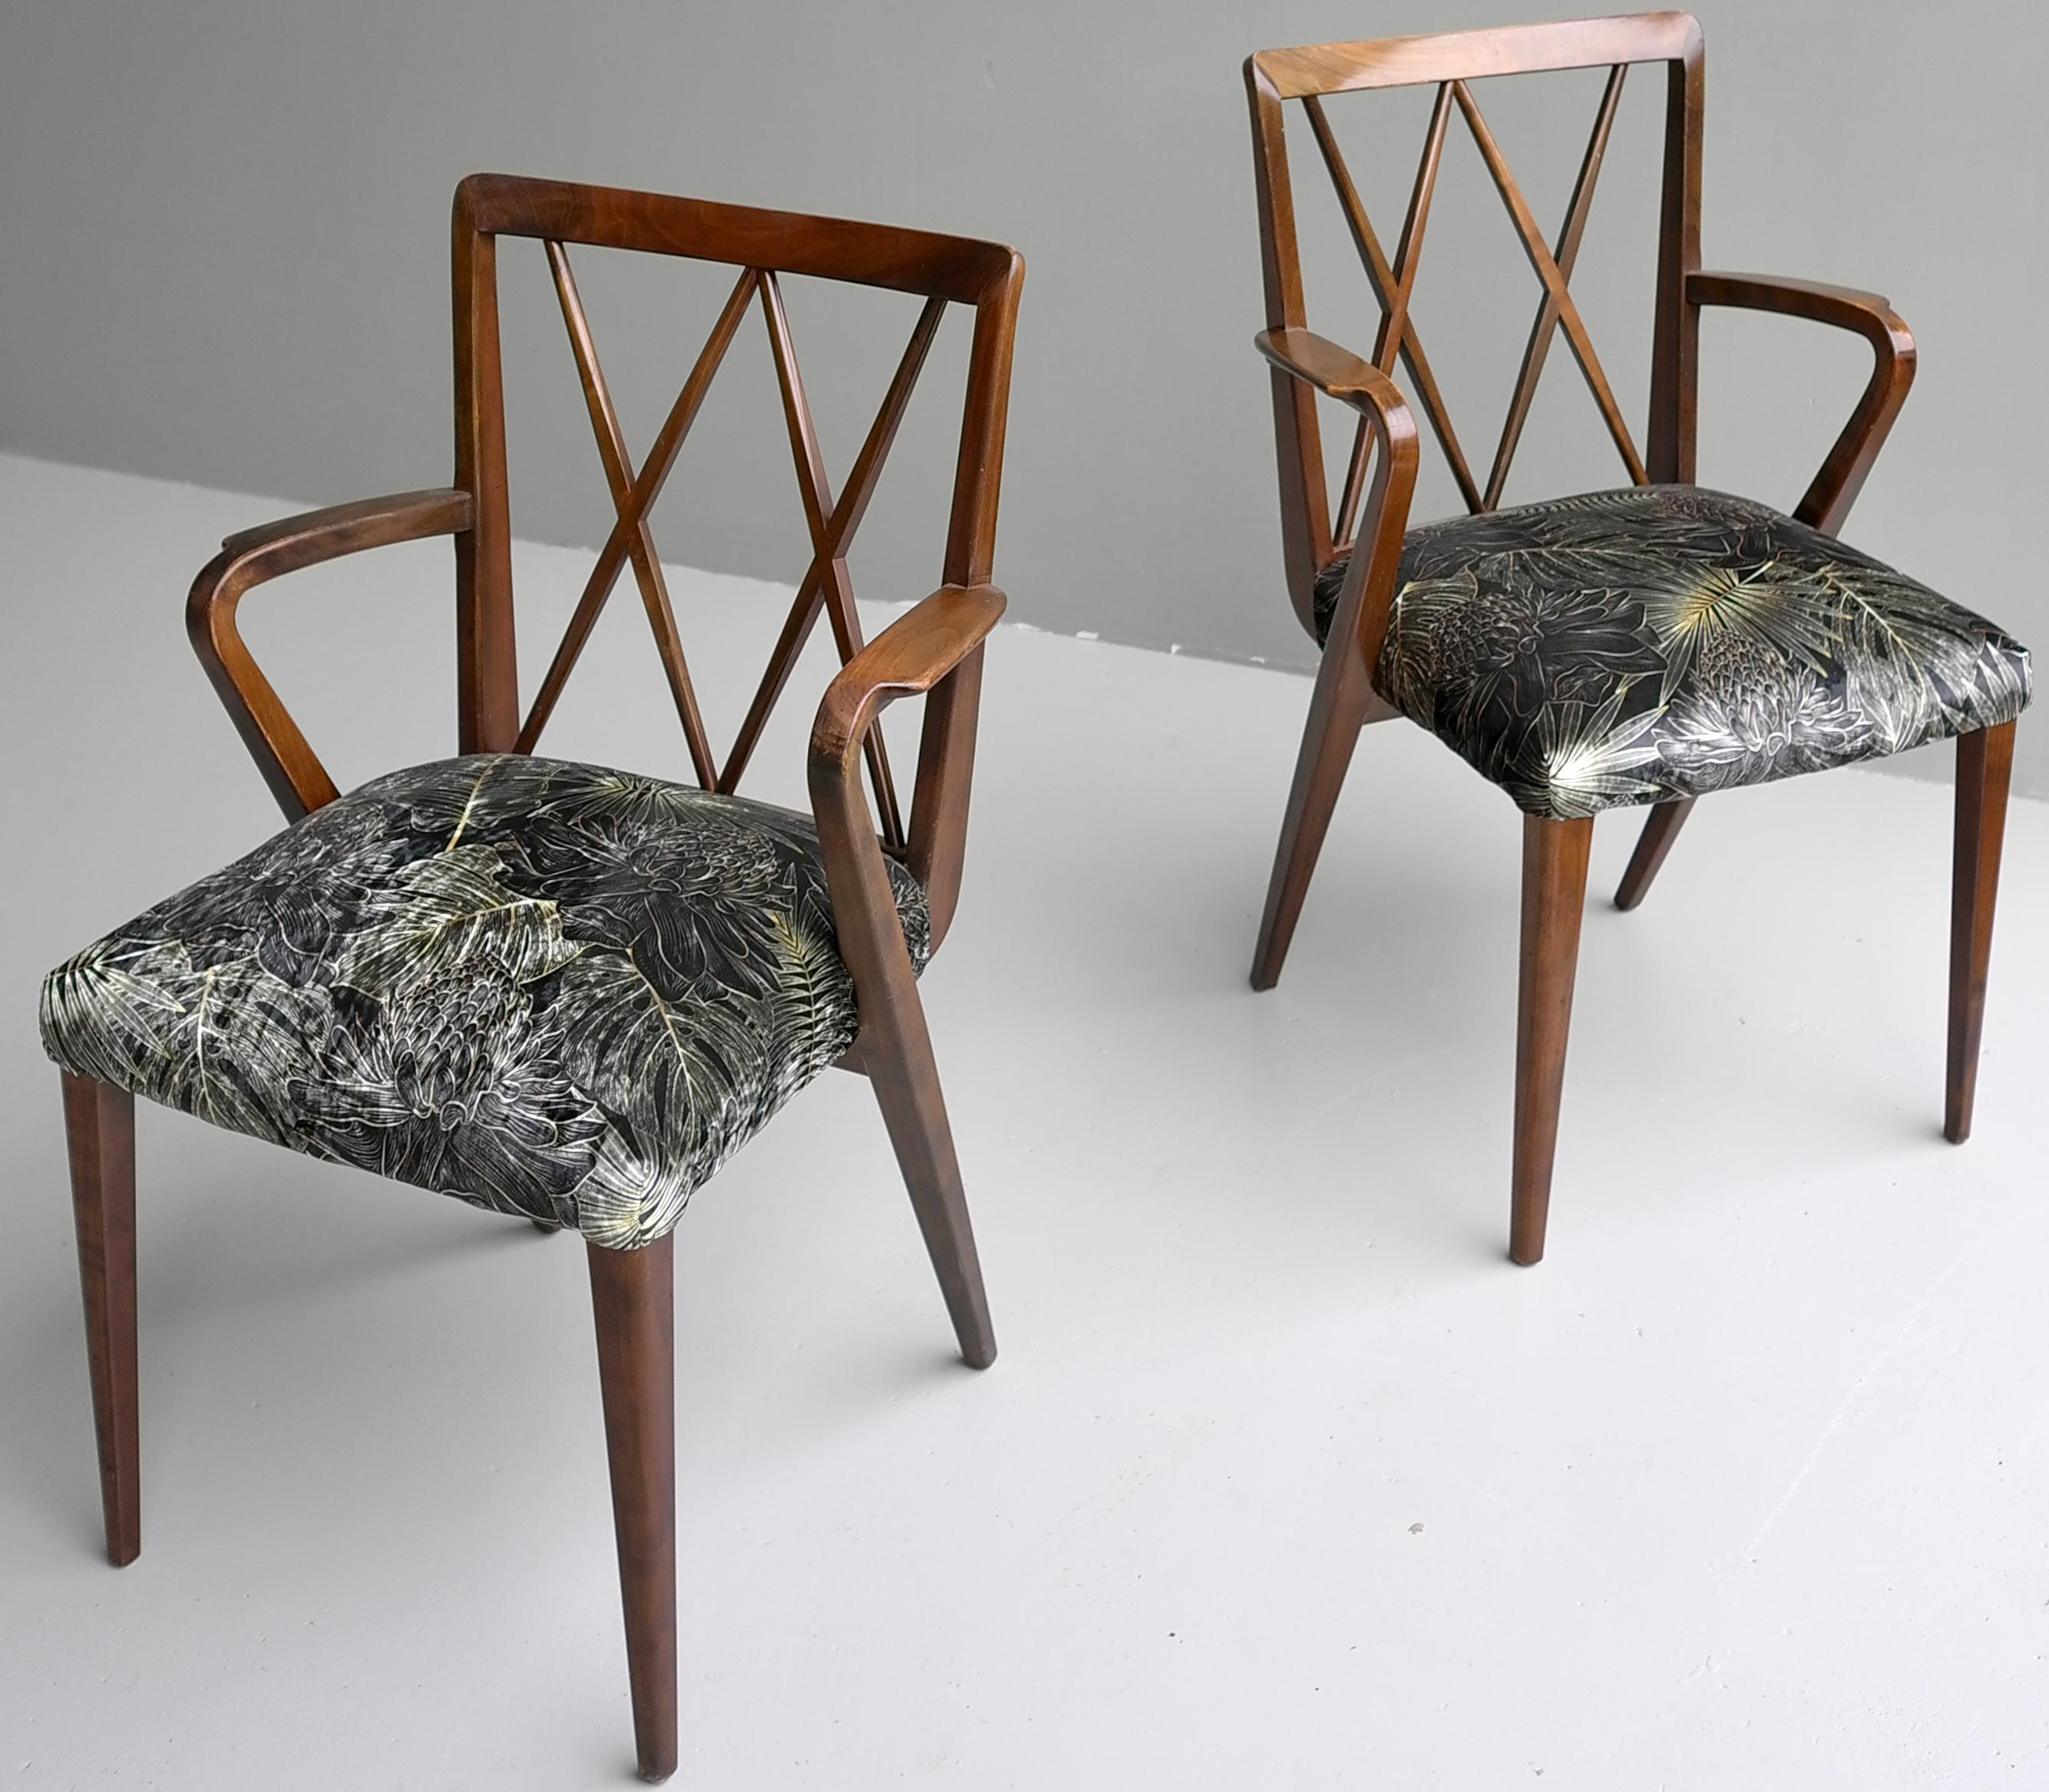 Abraham A Patijn Poly-Z Dining room chairs, The Netherlands 1950s. These Walnut chairs are newly upholstered in a Tropical fabric with leaf Pattern

size chairs: Height 88 cm, width 55 cm, depth 57 cm, seat height 48 cm.

Please ask us for an